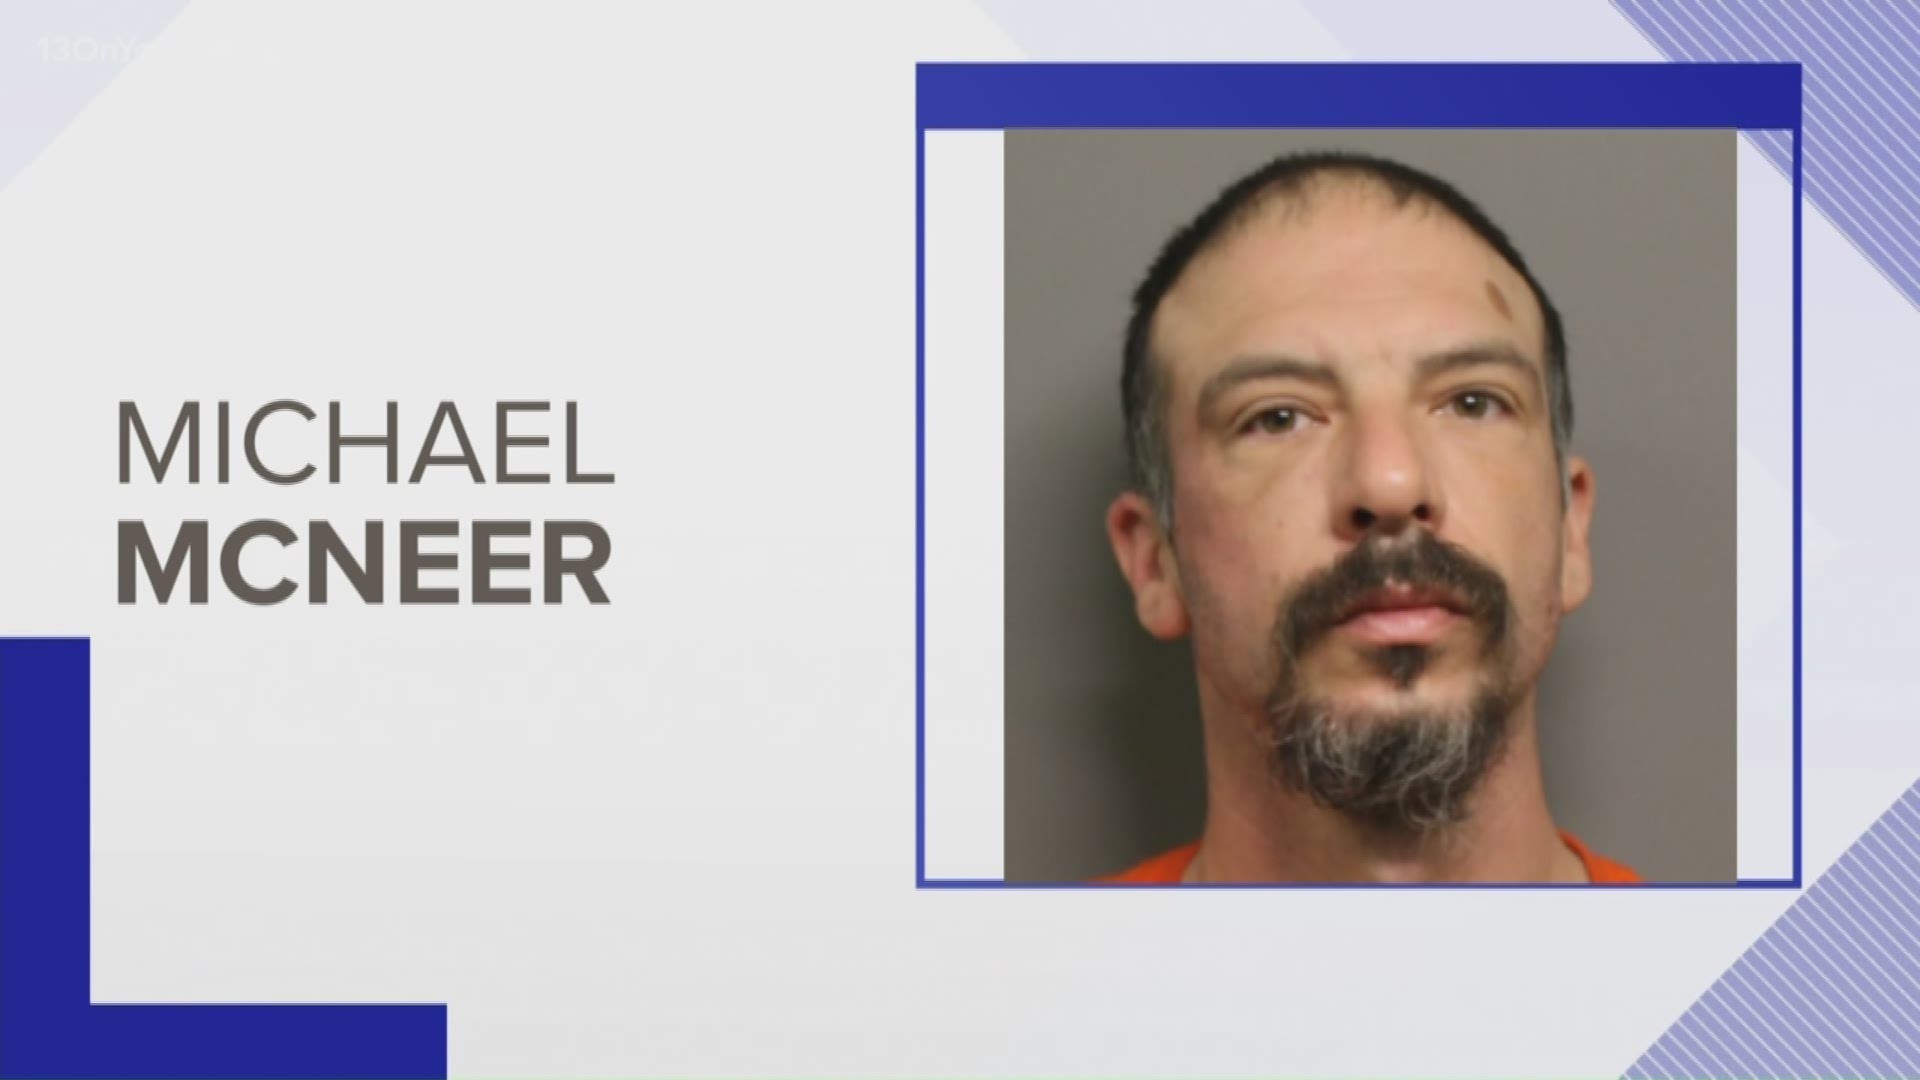 Michael McNeer was arrested and is being held at the Ottawa County Jail.